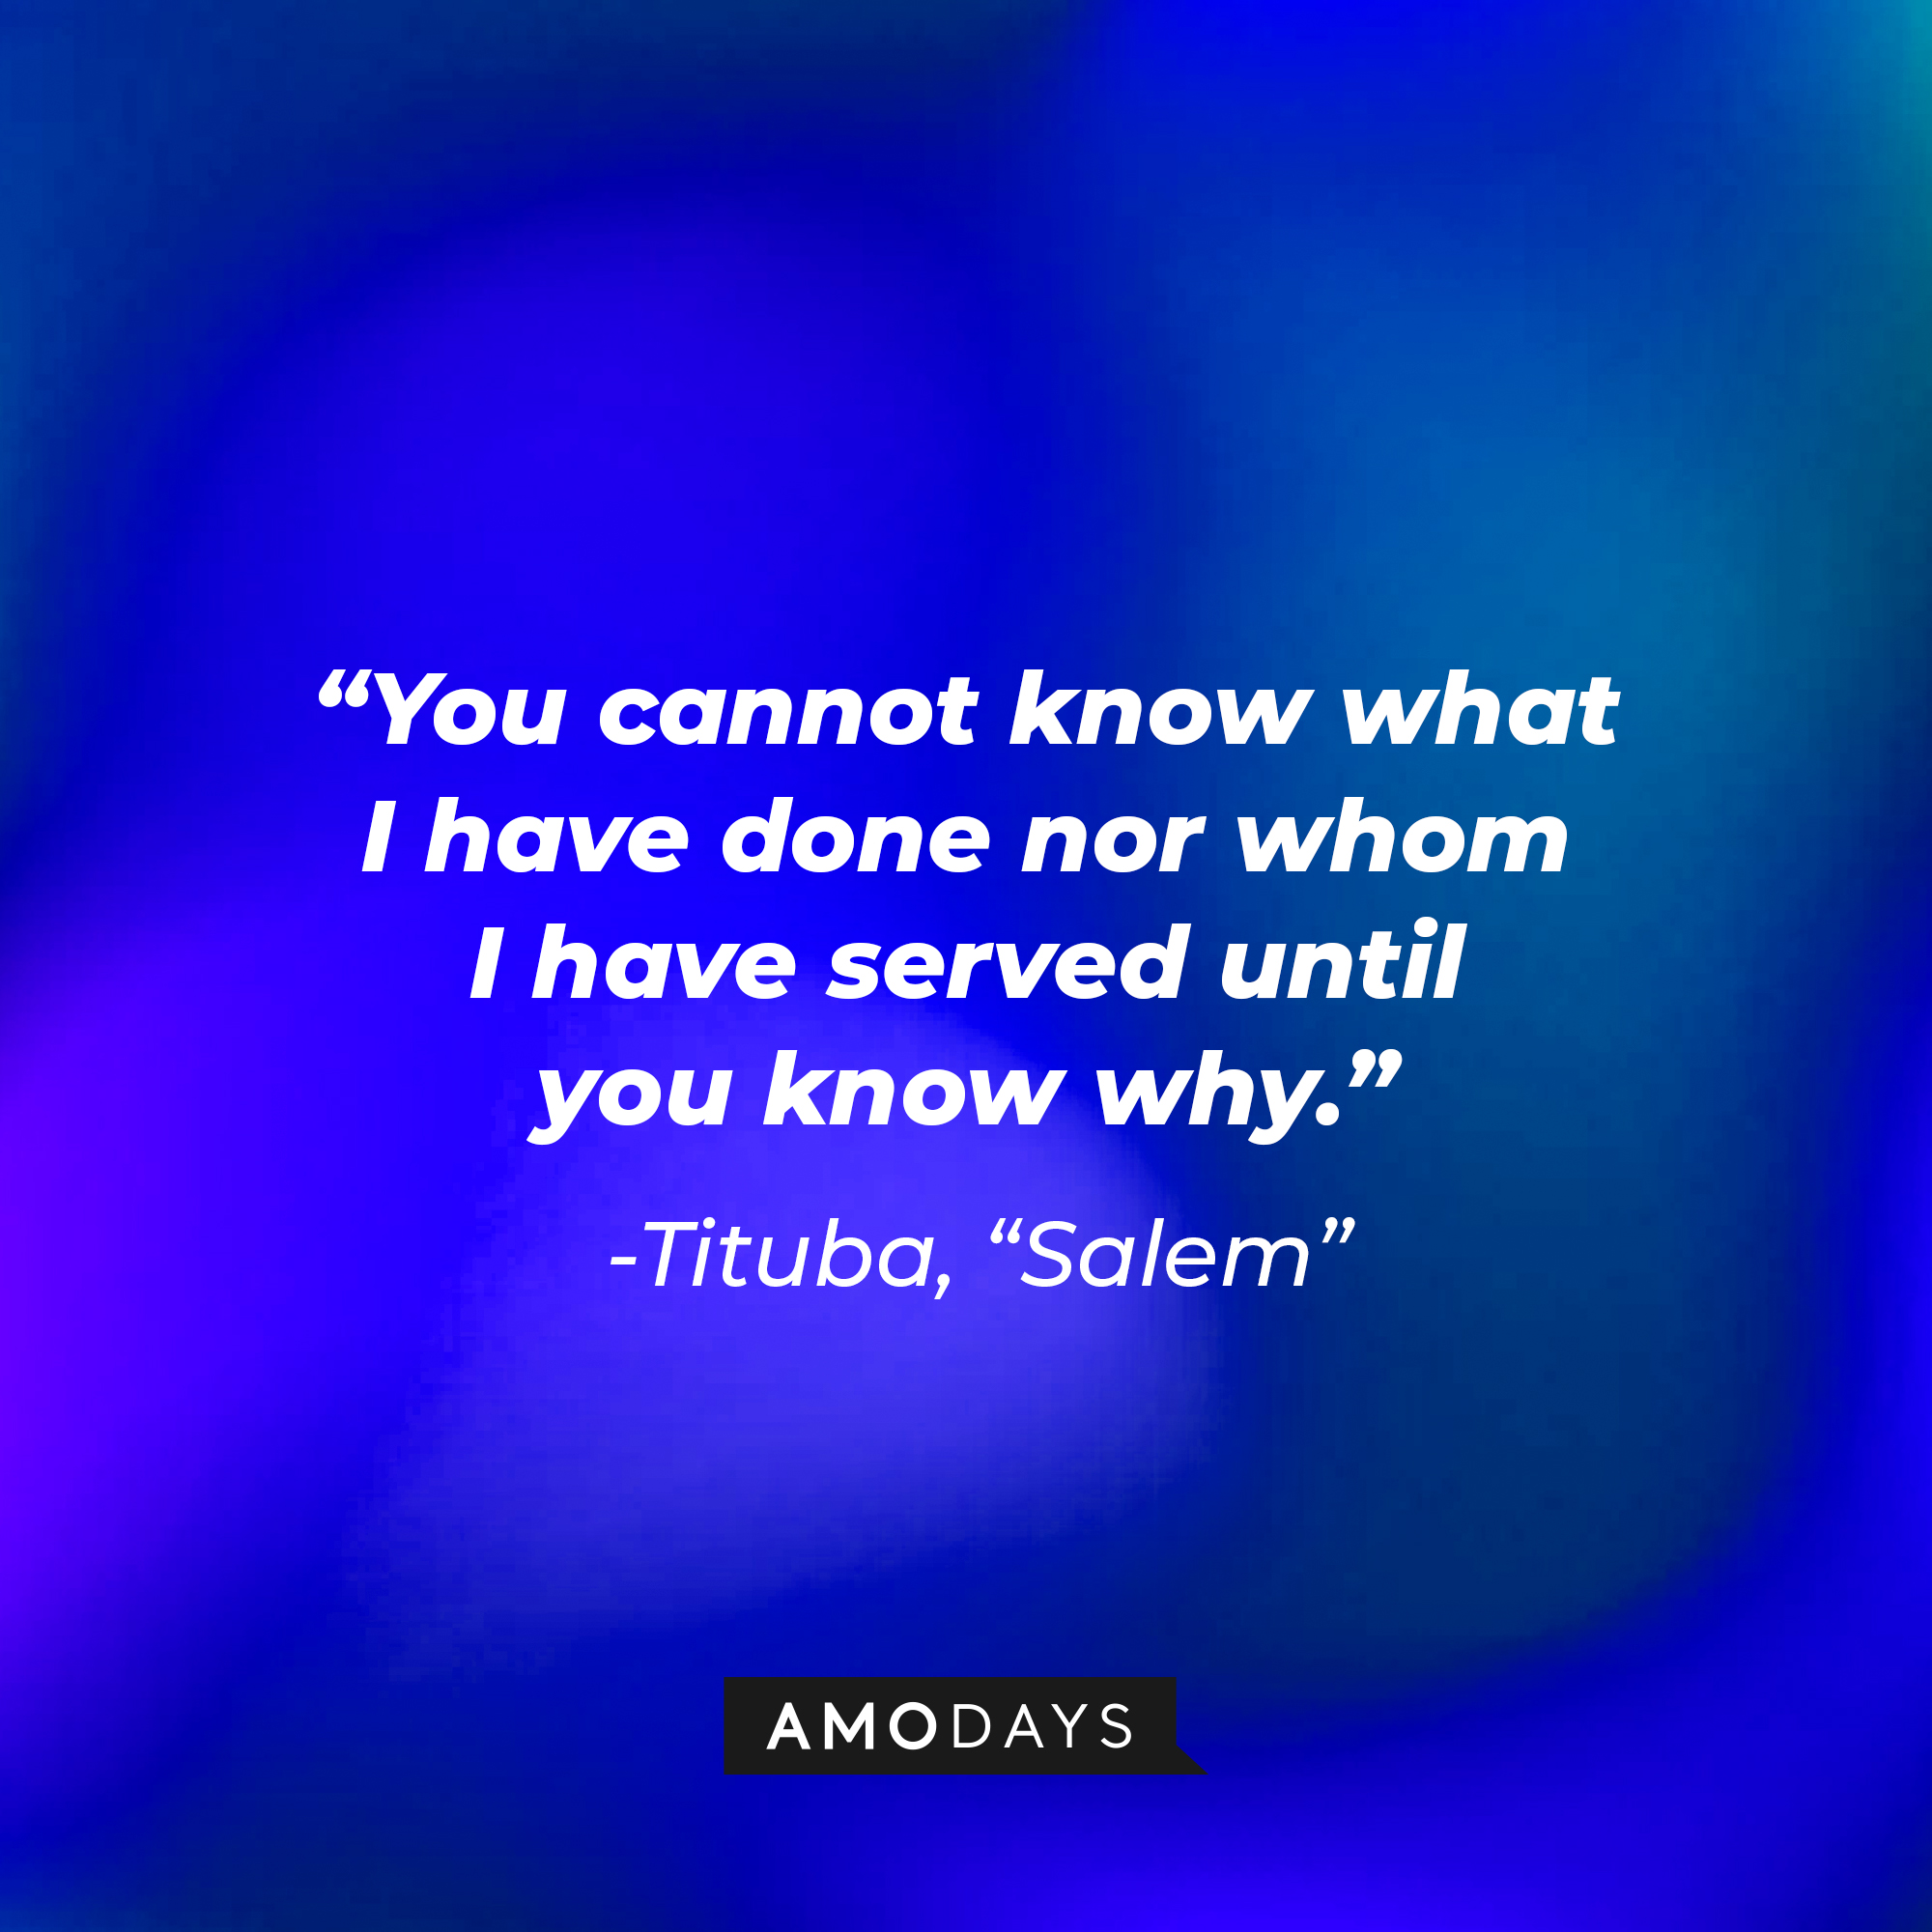 Tituba's quote: "You cannot know what I have done nor whom I have served until you know why." | Source: Amodays